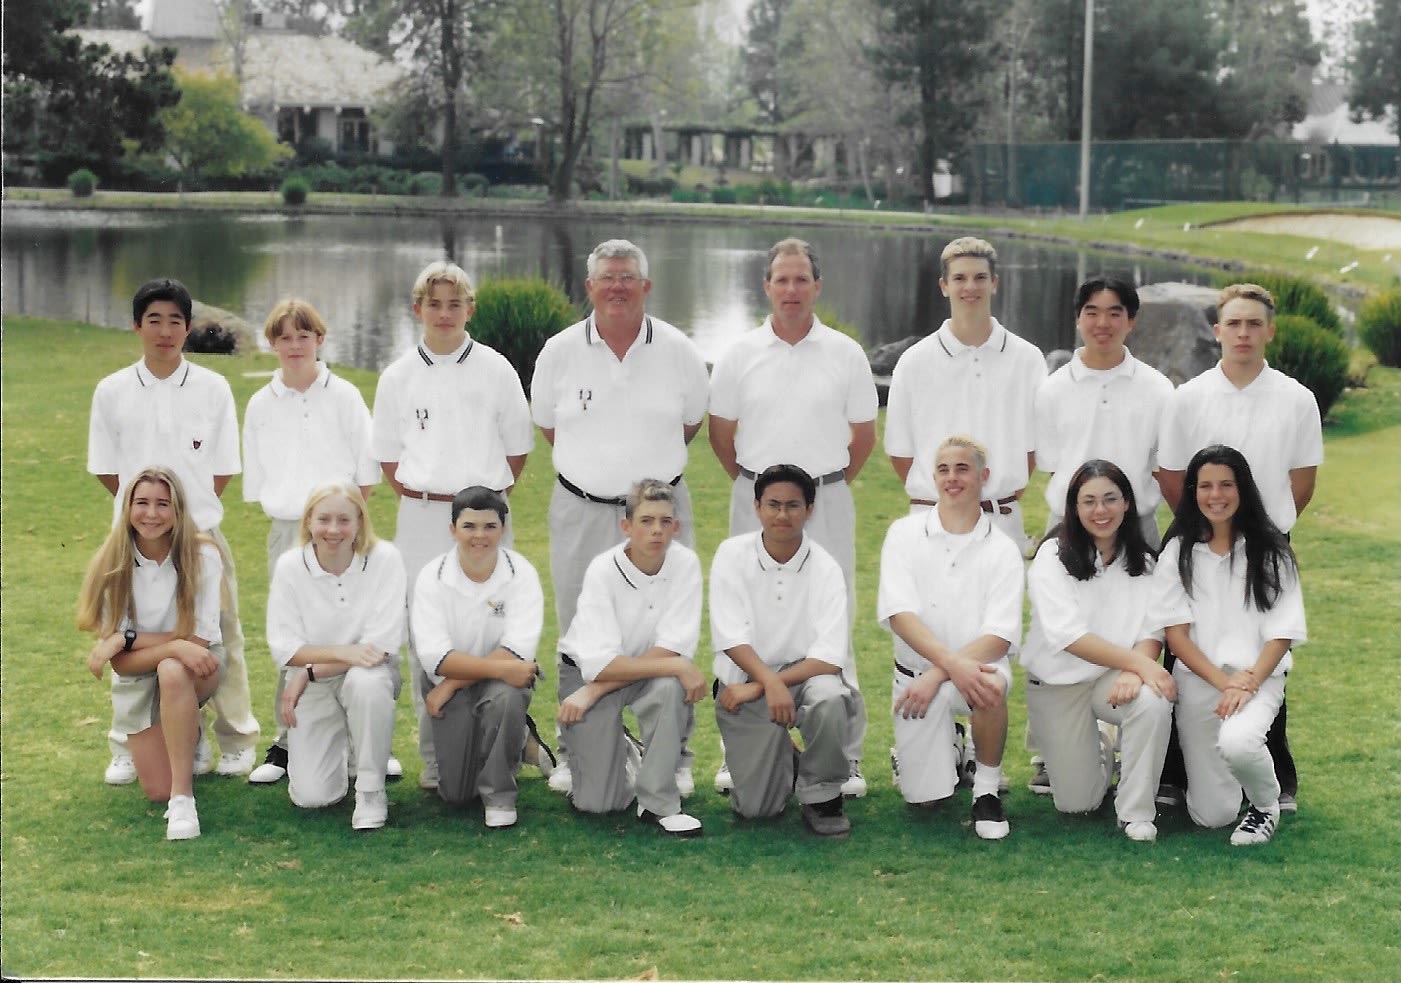 Bendt (first row, furthest right) played on the Agoura High School boy's golf team growing up outside Los Angeles. 